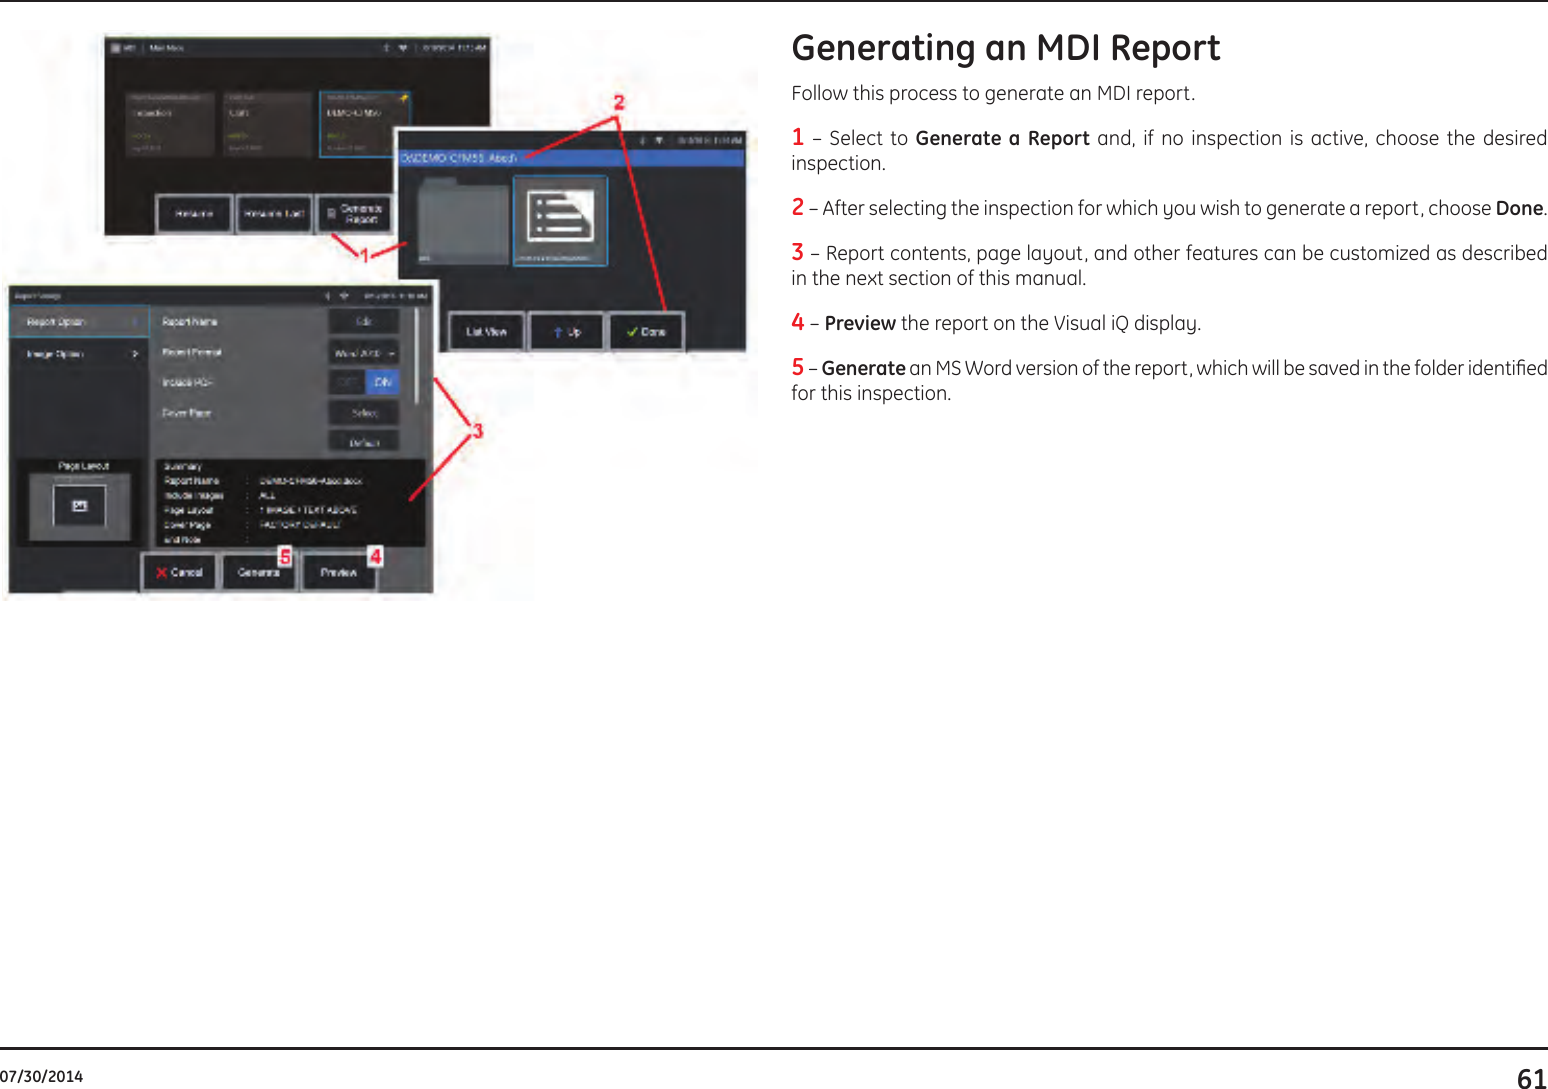 6107/30/2014Generating an MDI ReportFollow this process to generate an MDI report.1 – Select to Generate a Report and, if no inspection is active, choose the desired inspection.2 – After selecting the inspection for which you wish to generate a report, choose Done.3 – Report contents, page layout, and other features can be customized as described in the next section of this manual.4 – Preview the report on the Visual iQ display. 5 – Generate an MS Word version of the report, which will be saved in the folder identied for this inspection.